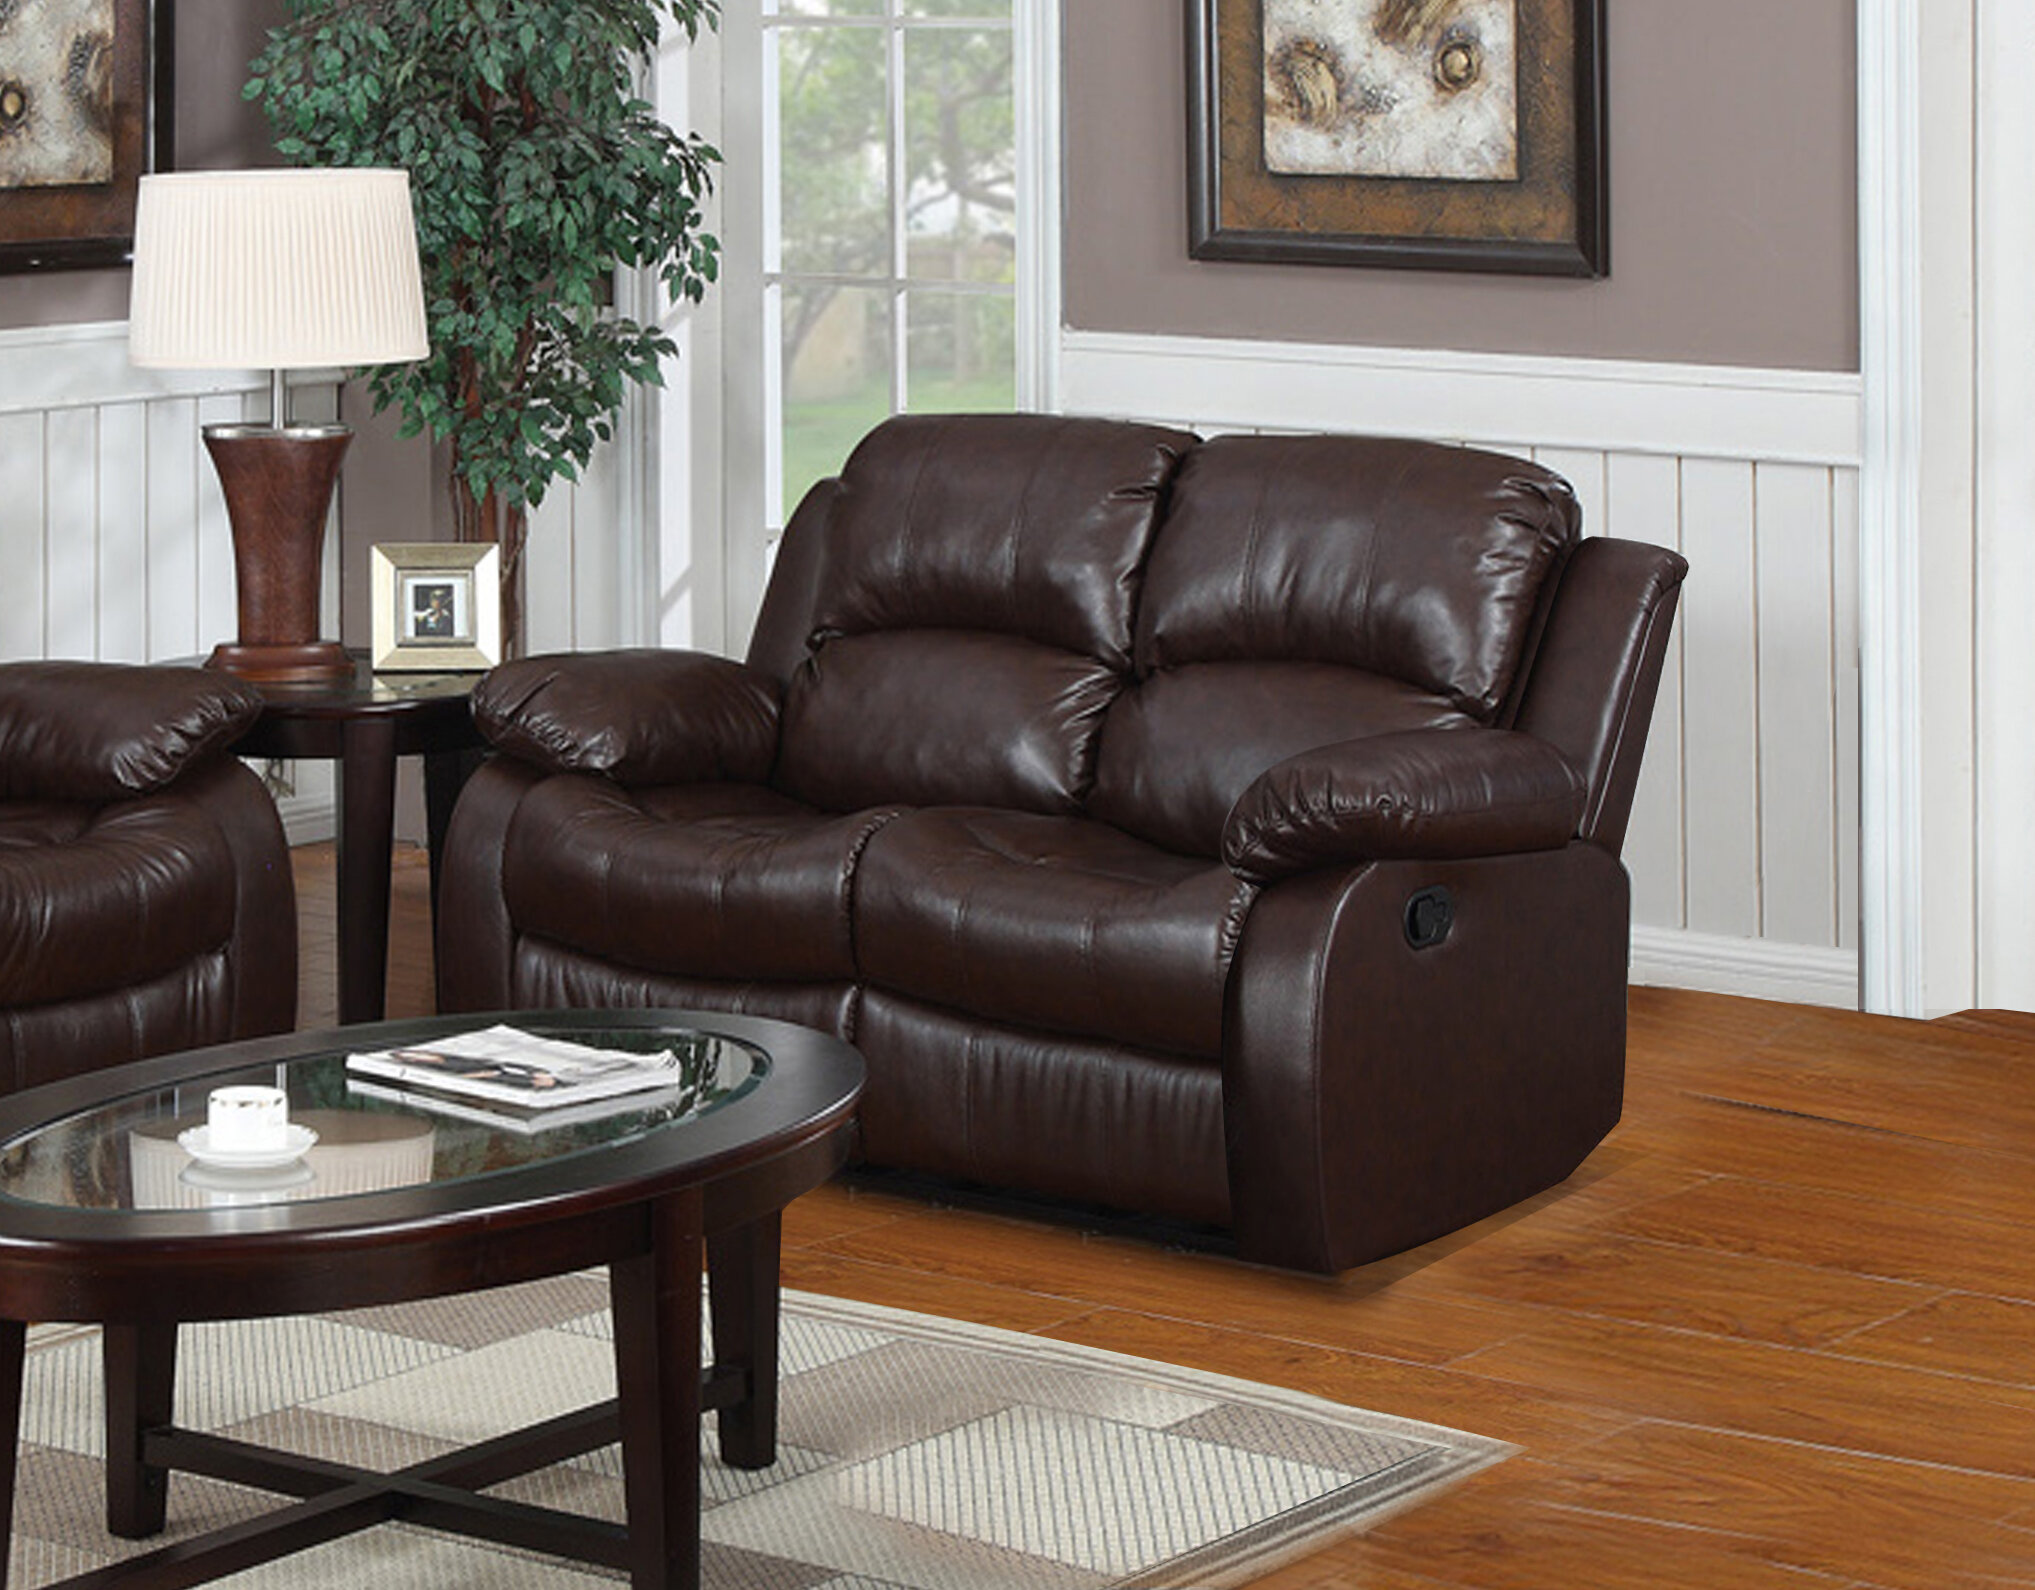 Medora 60” Faux Leather Pillow Top Arm Reclining Loveseat